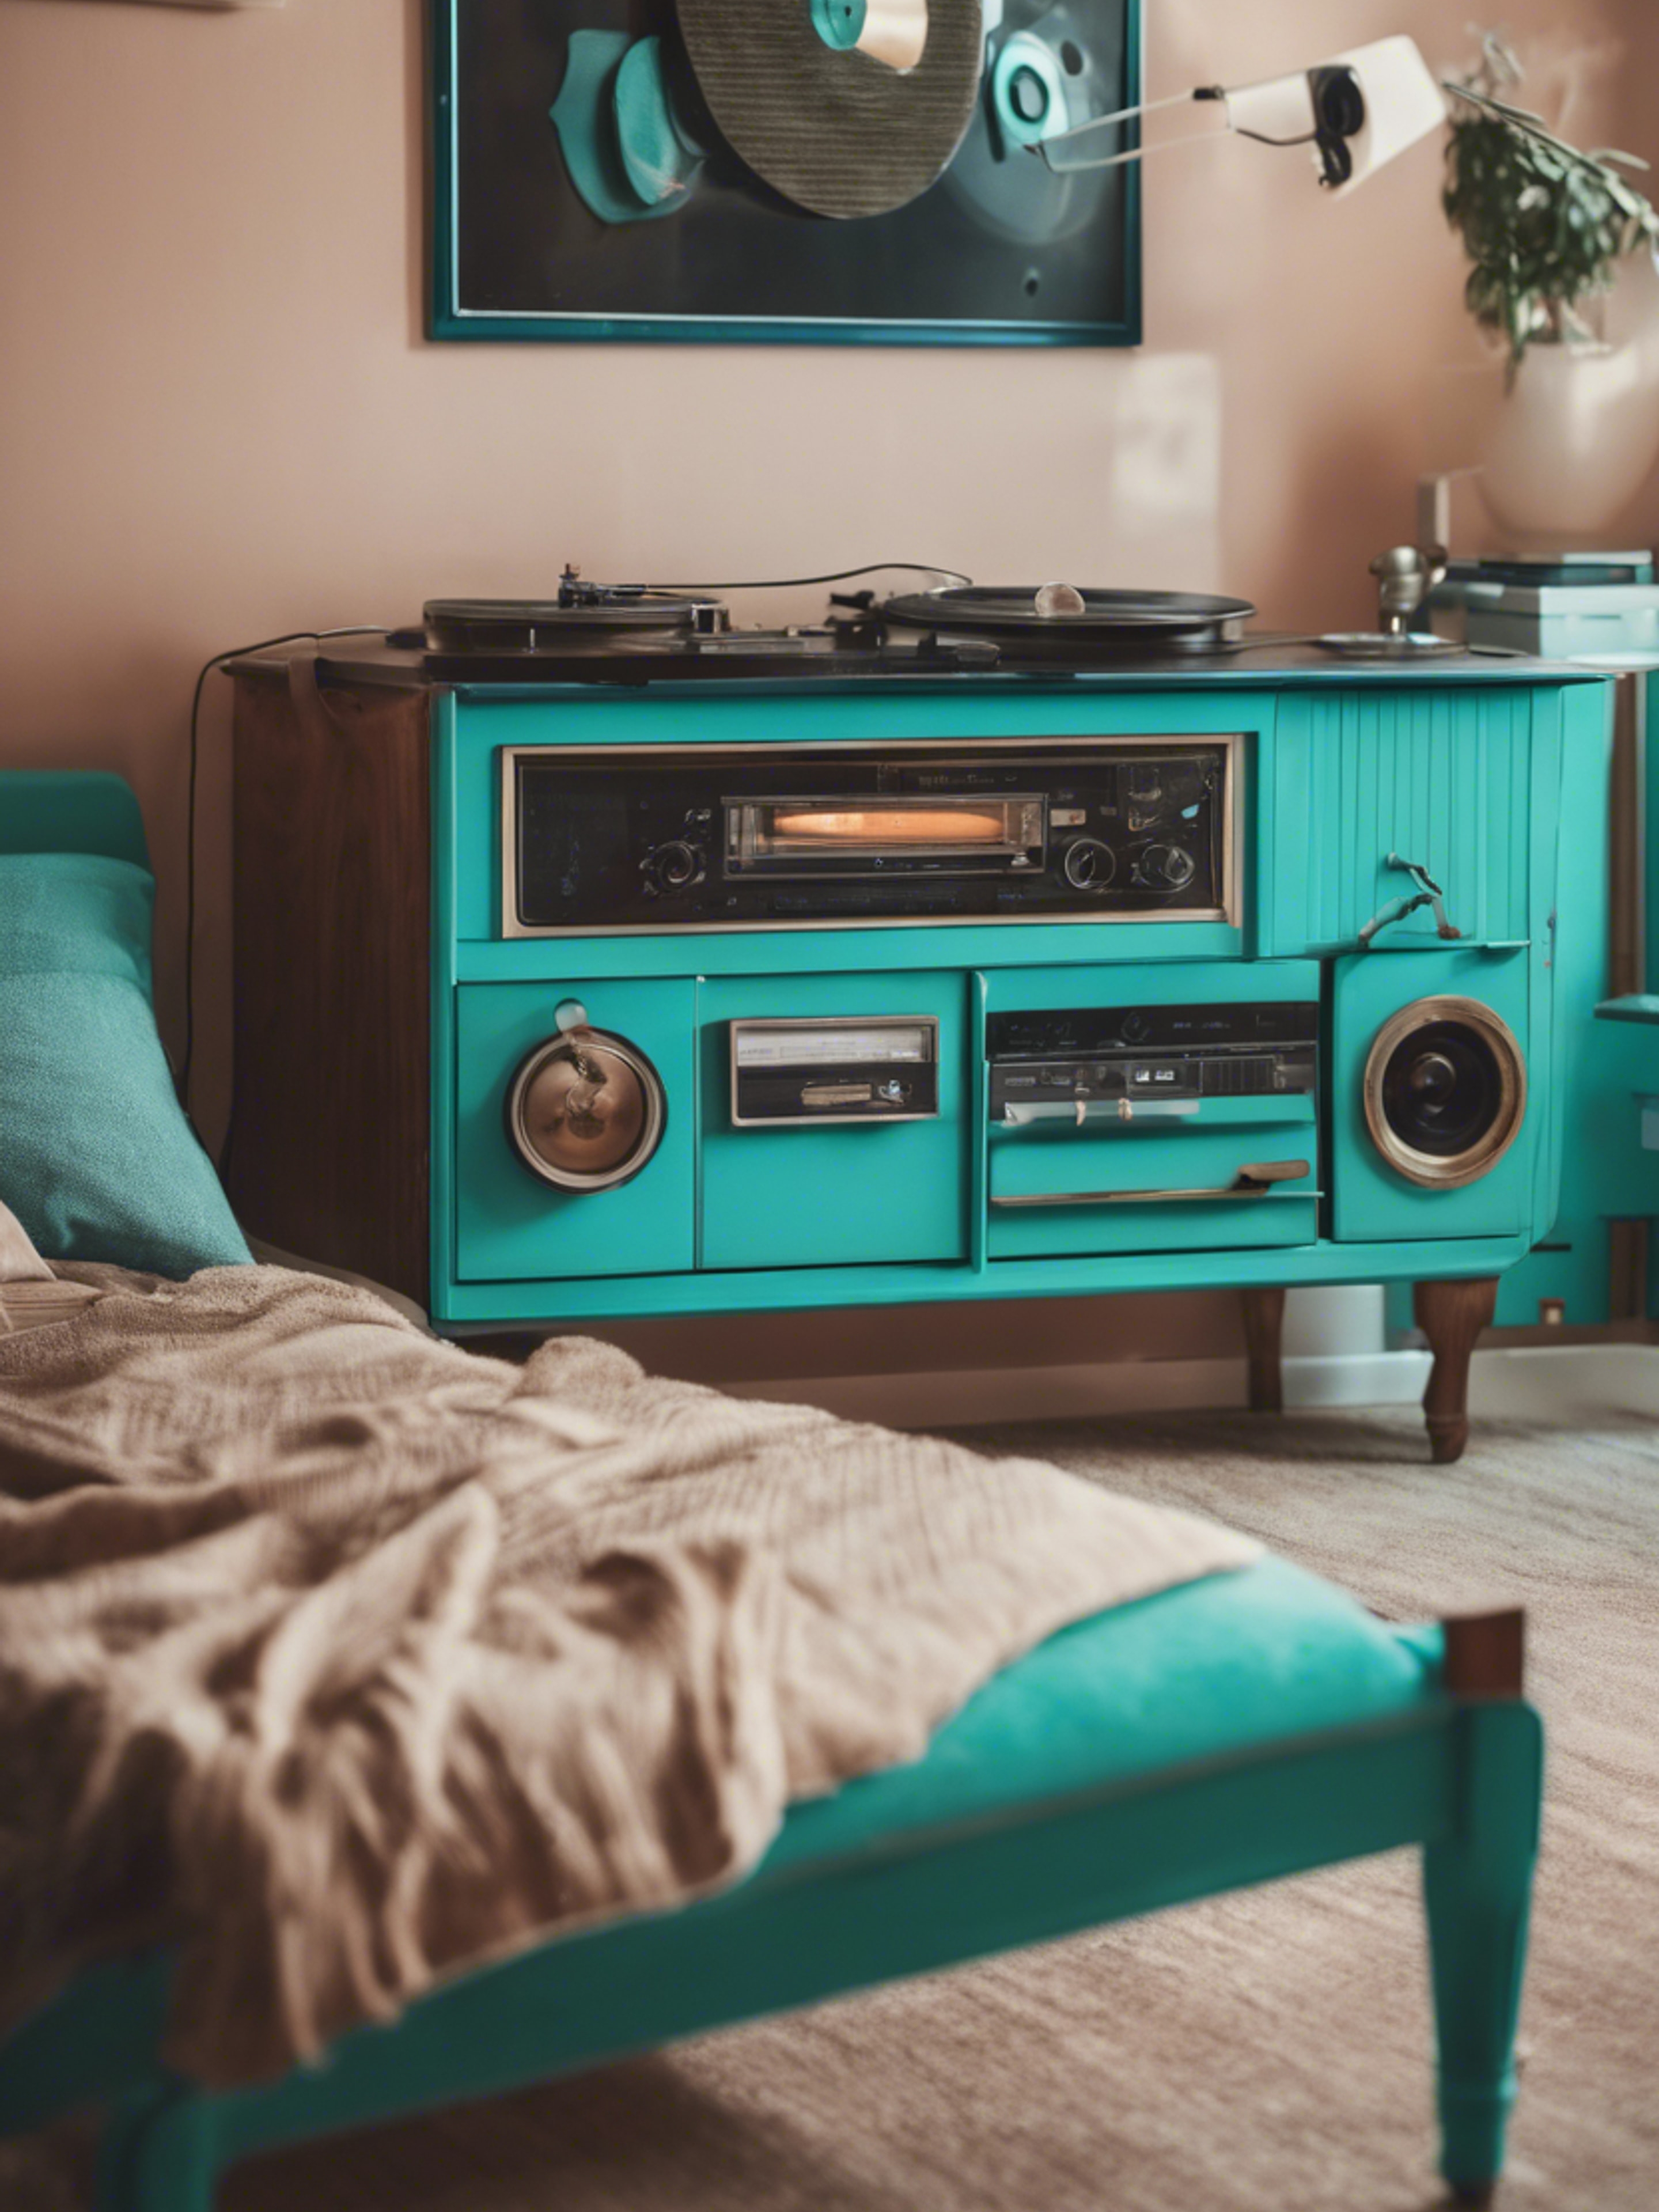 A turquoise retro bedroom with vintage furniture and record players Tapeta[9d05420ae9754c17b49a]